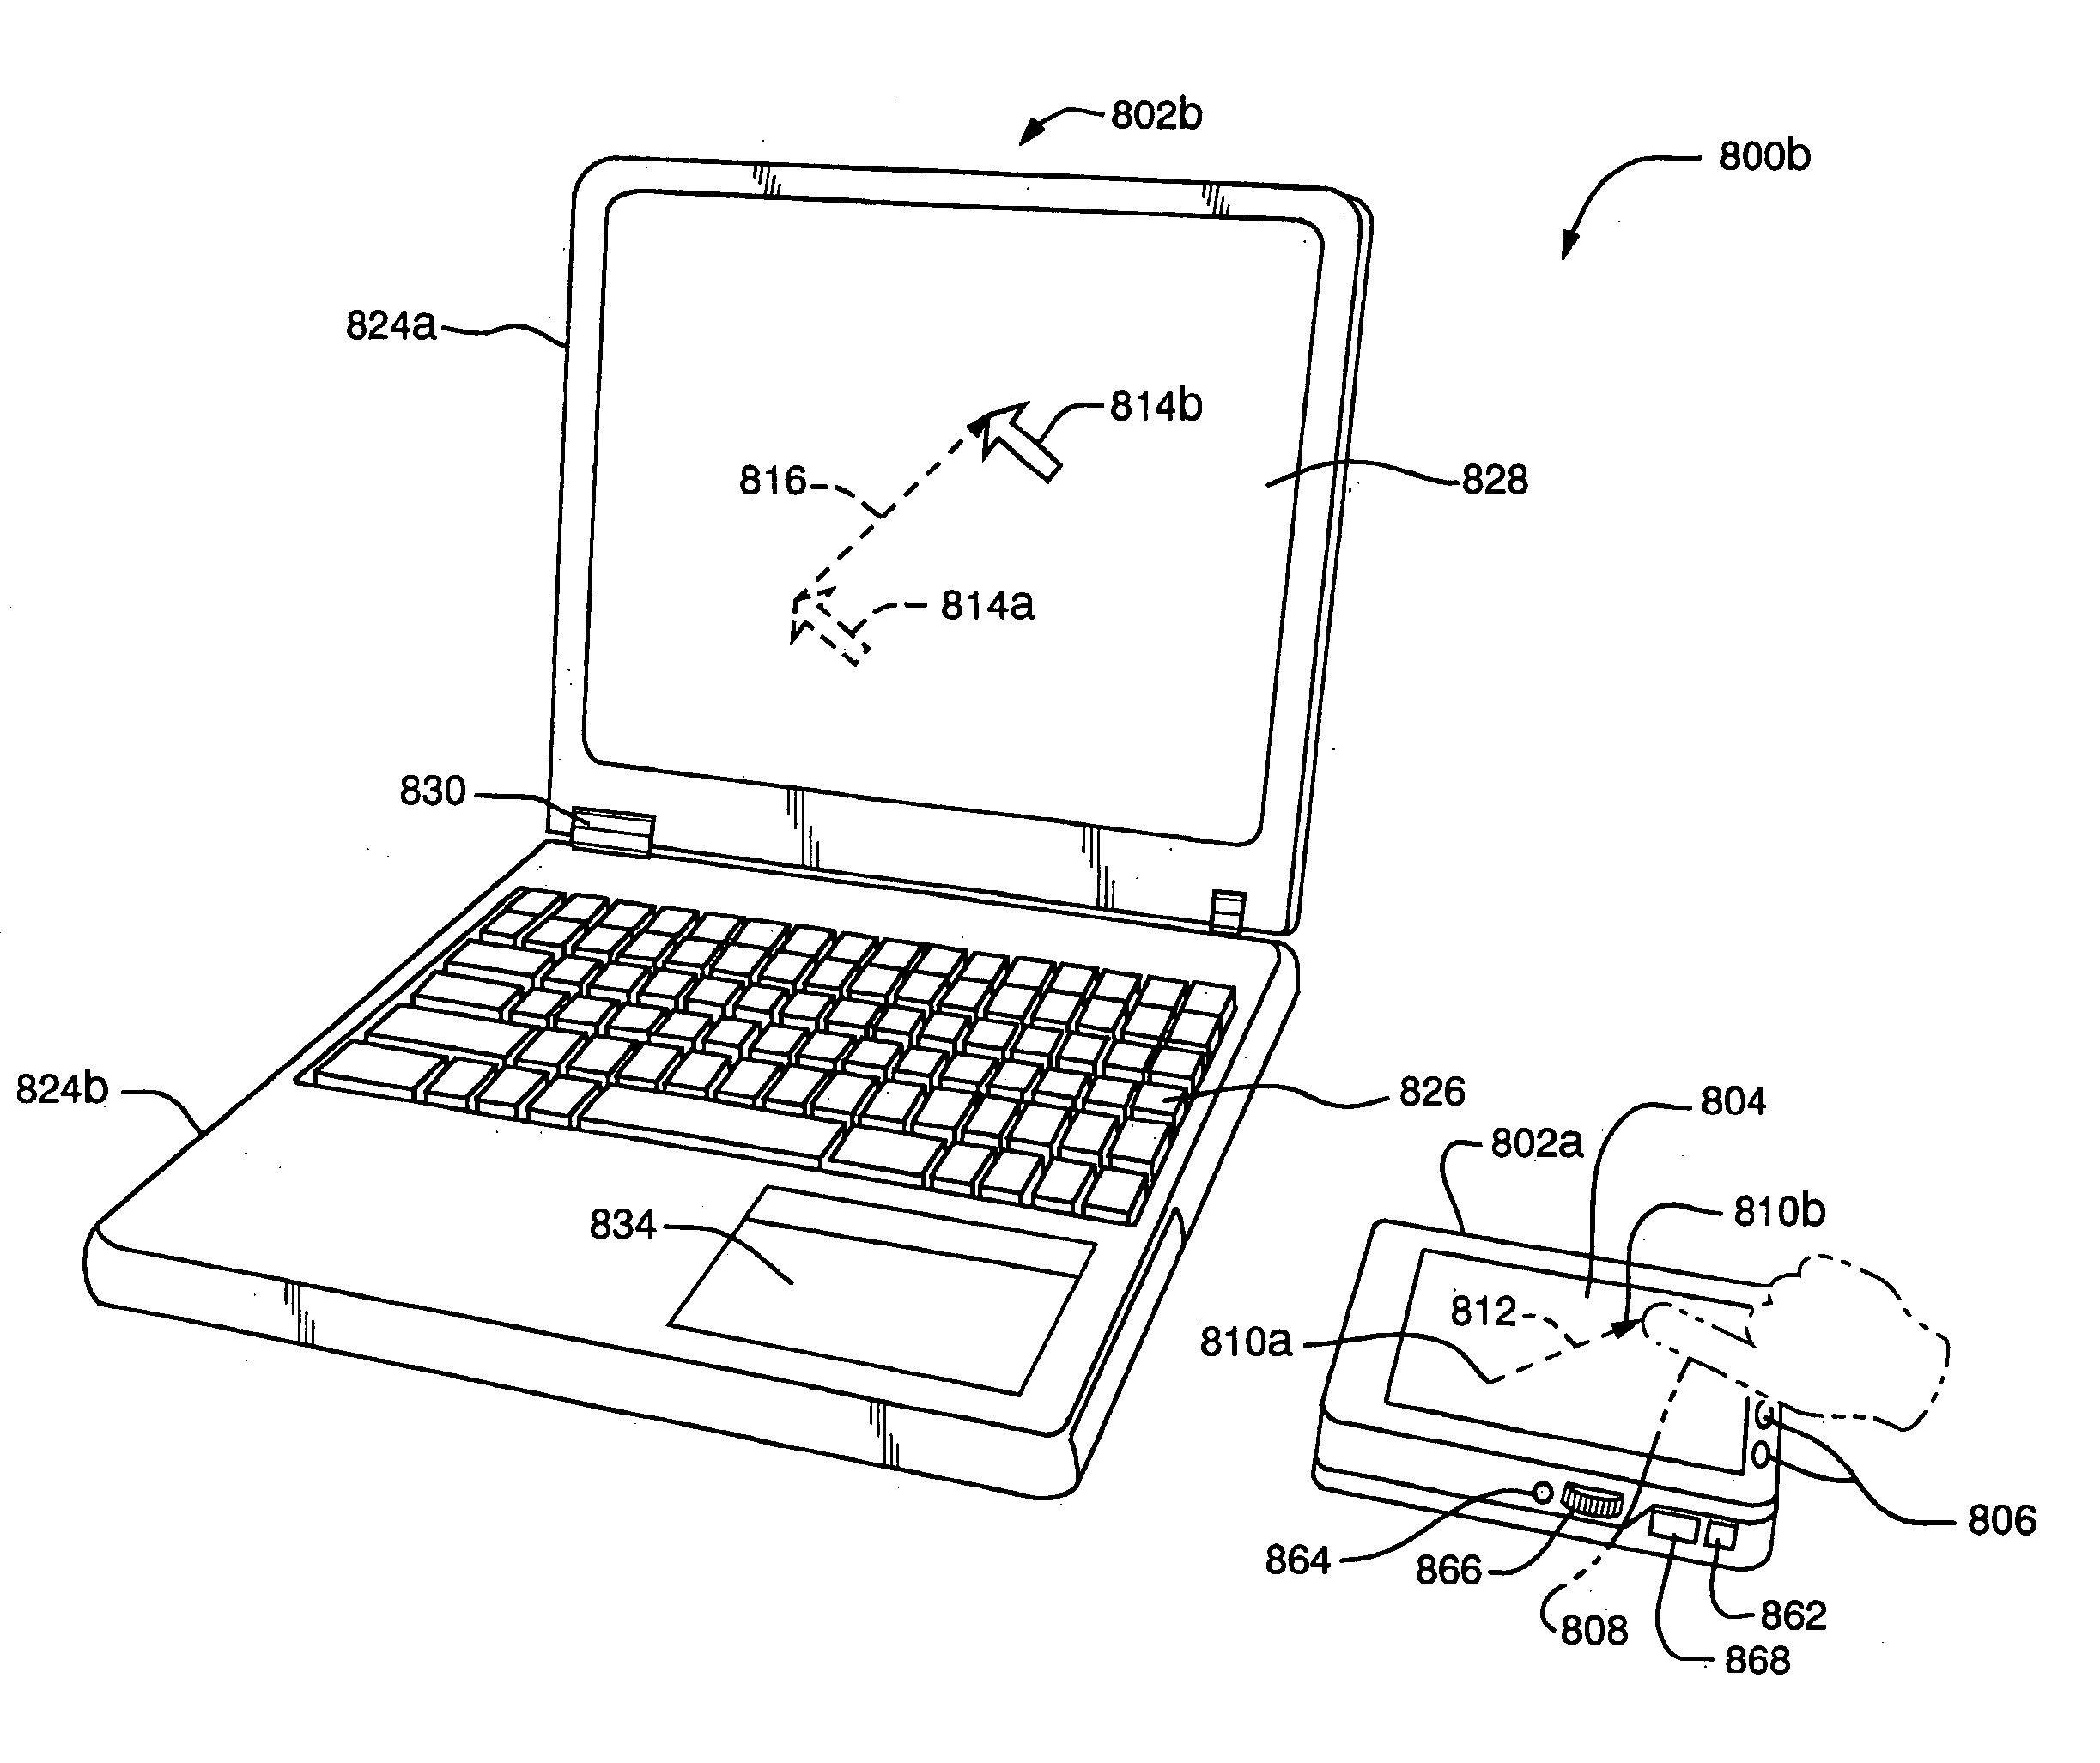 Docking station for mobile computing device